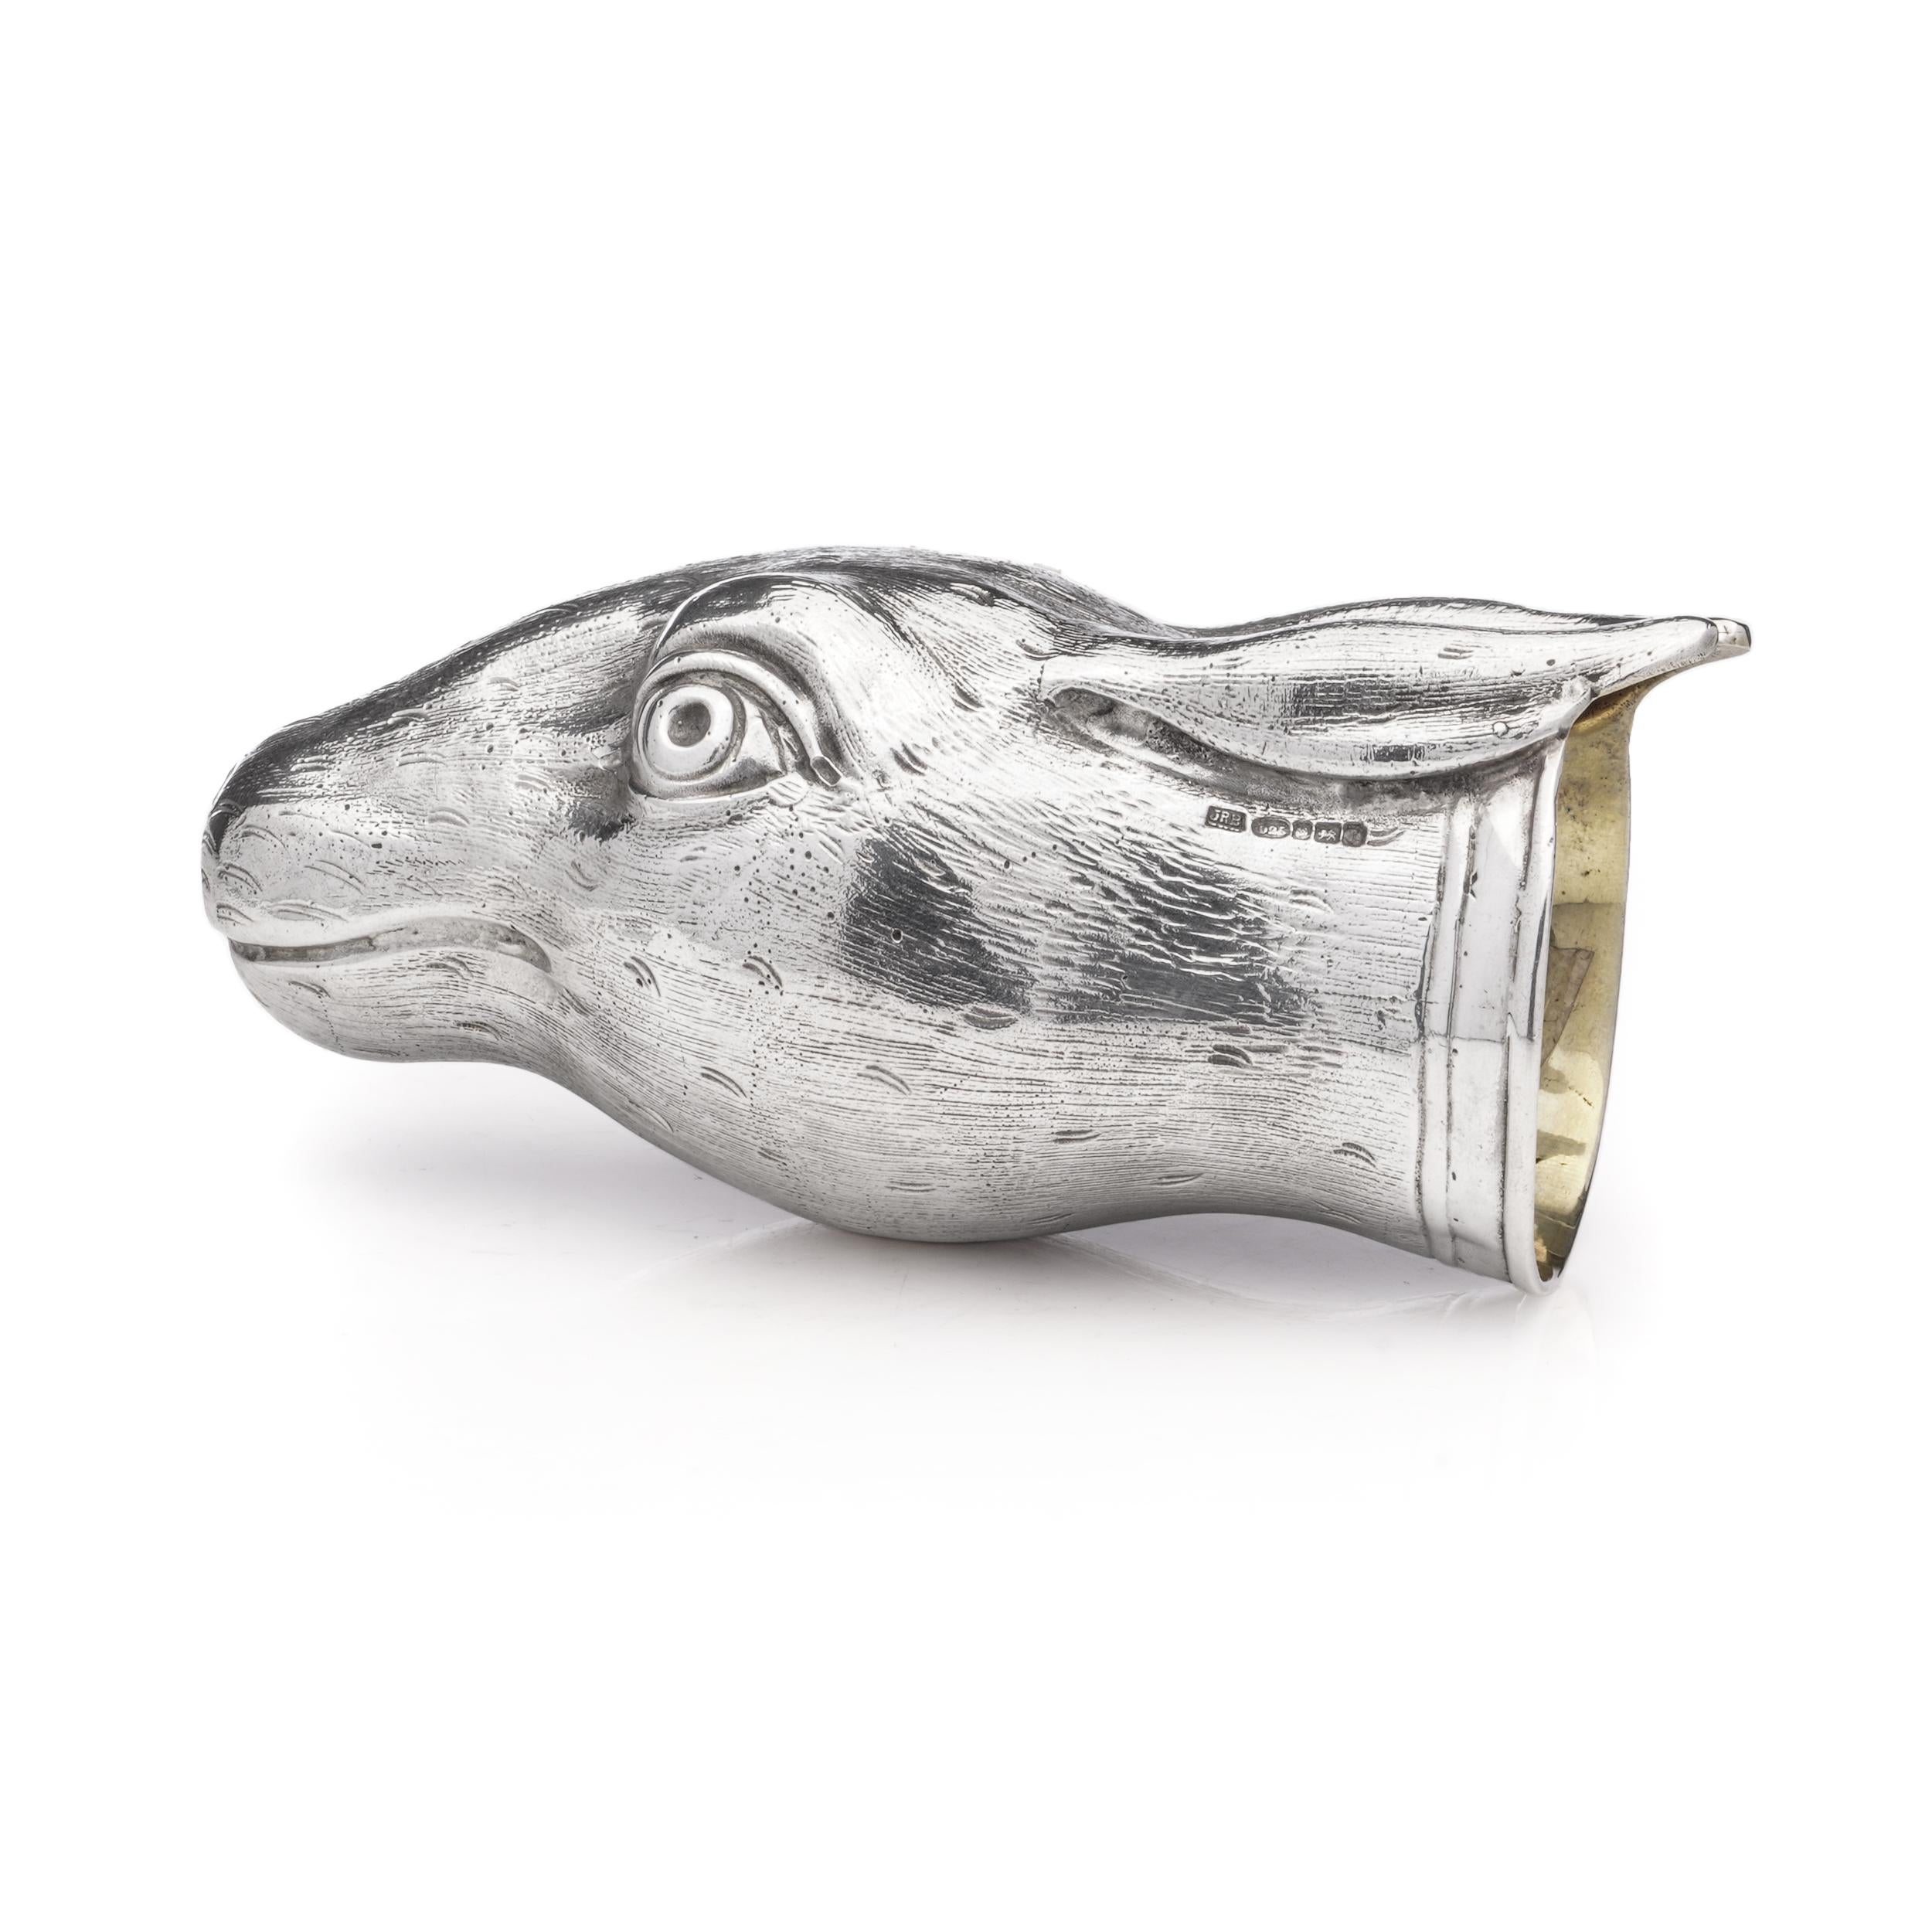 Exceptional Modern Sterling Silver Stirrup Cup Shaped as a Rabbit In Excellent Condition For Sale In Braintree, GB